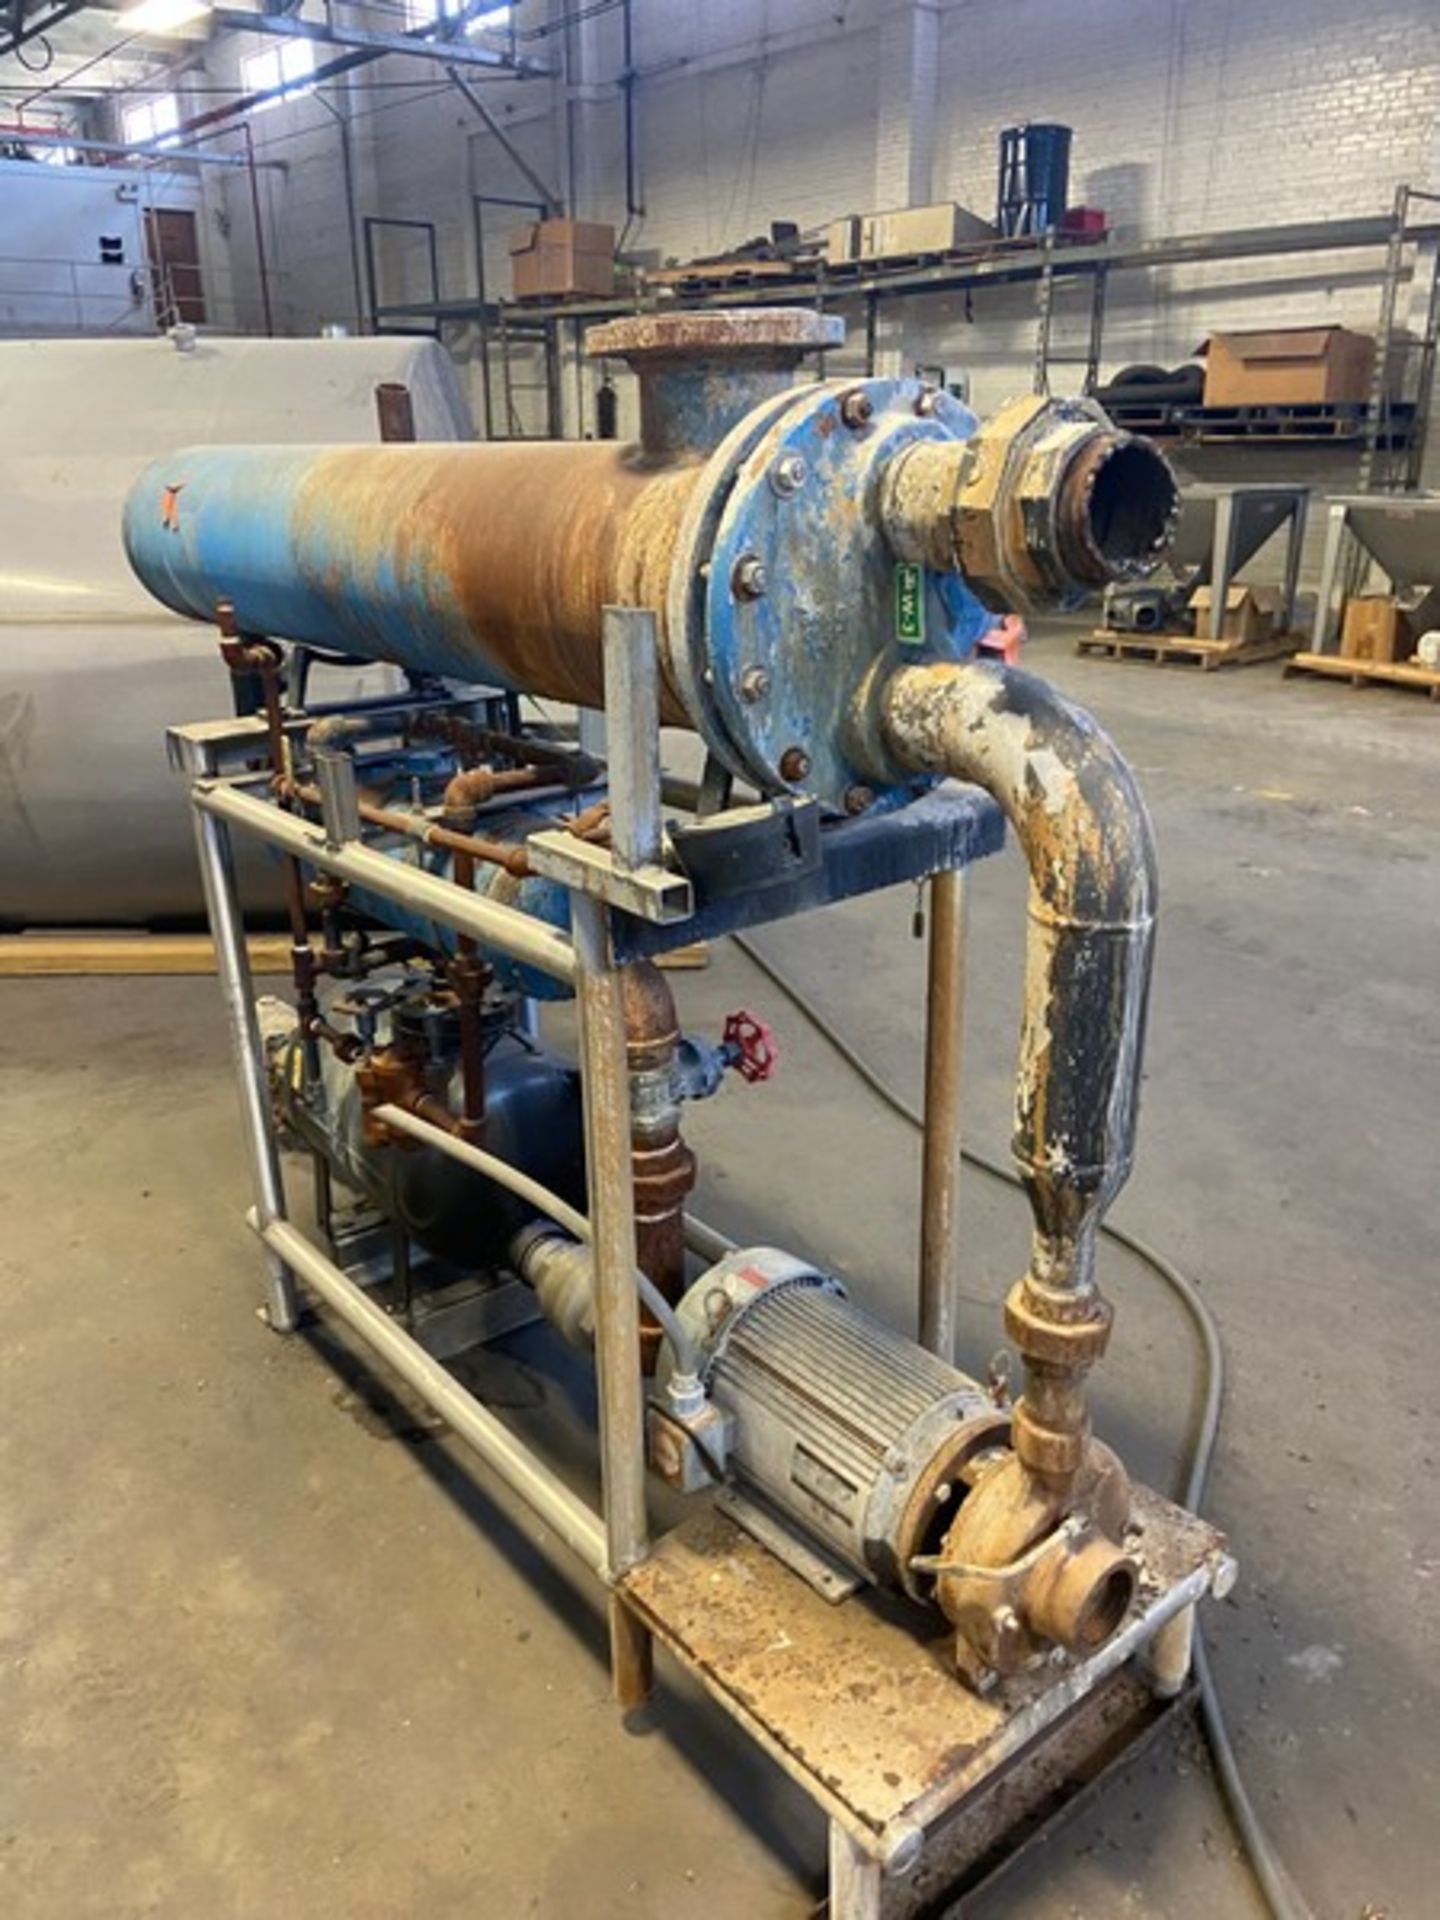 Shell & Tube Heat Exchanger, Includes Centrifugal Pump, with Related Valving & Piping on Skid, - Image 5 of 5